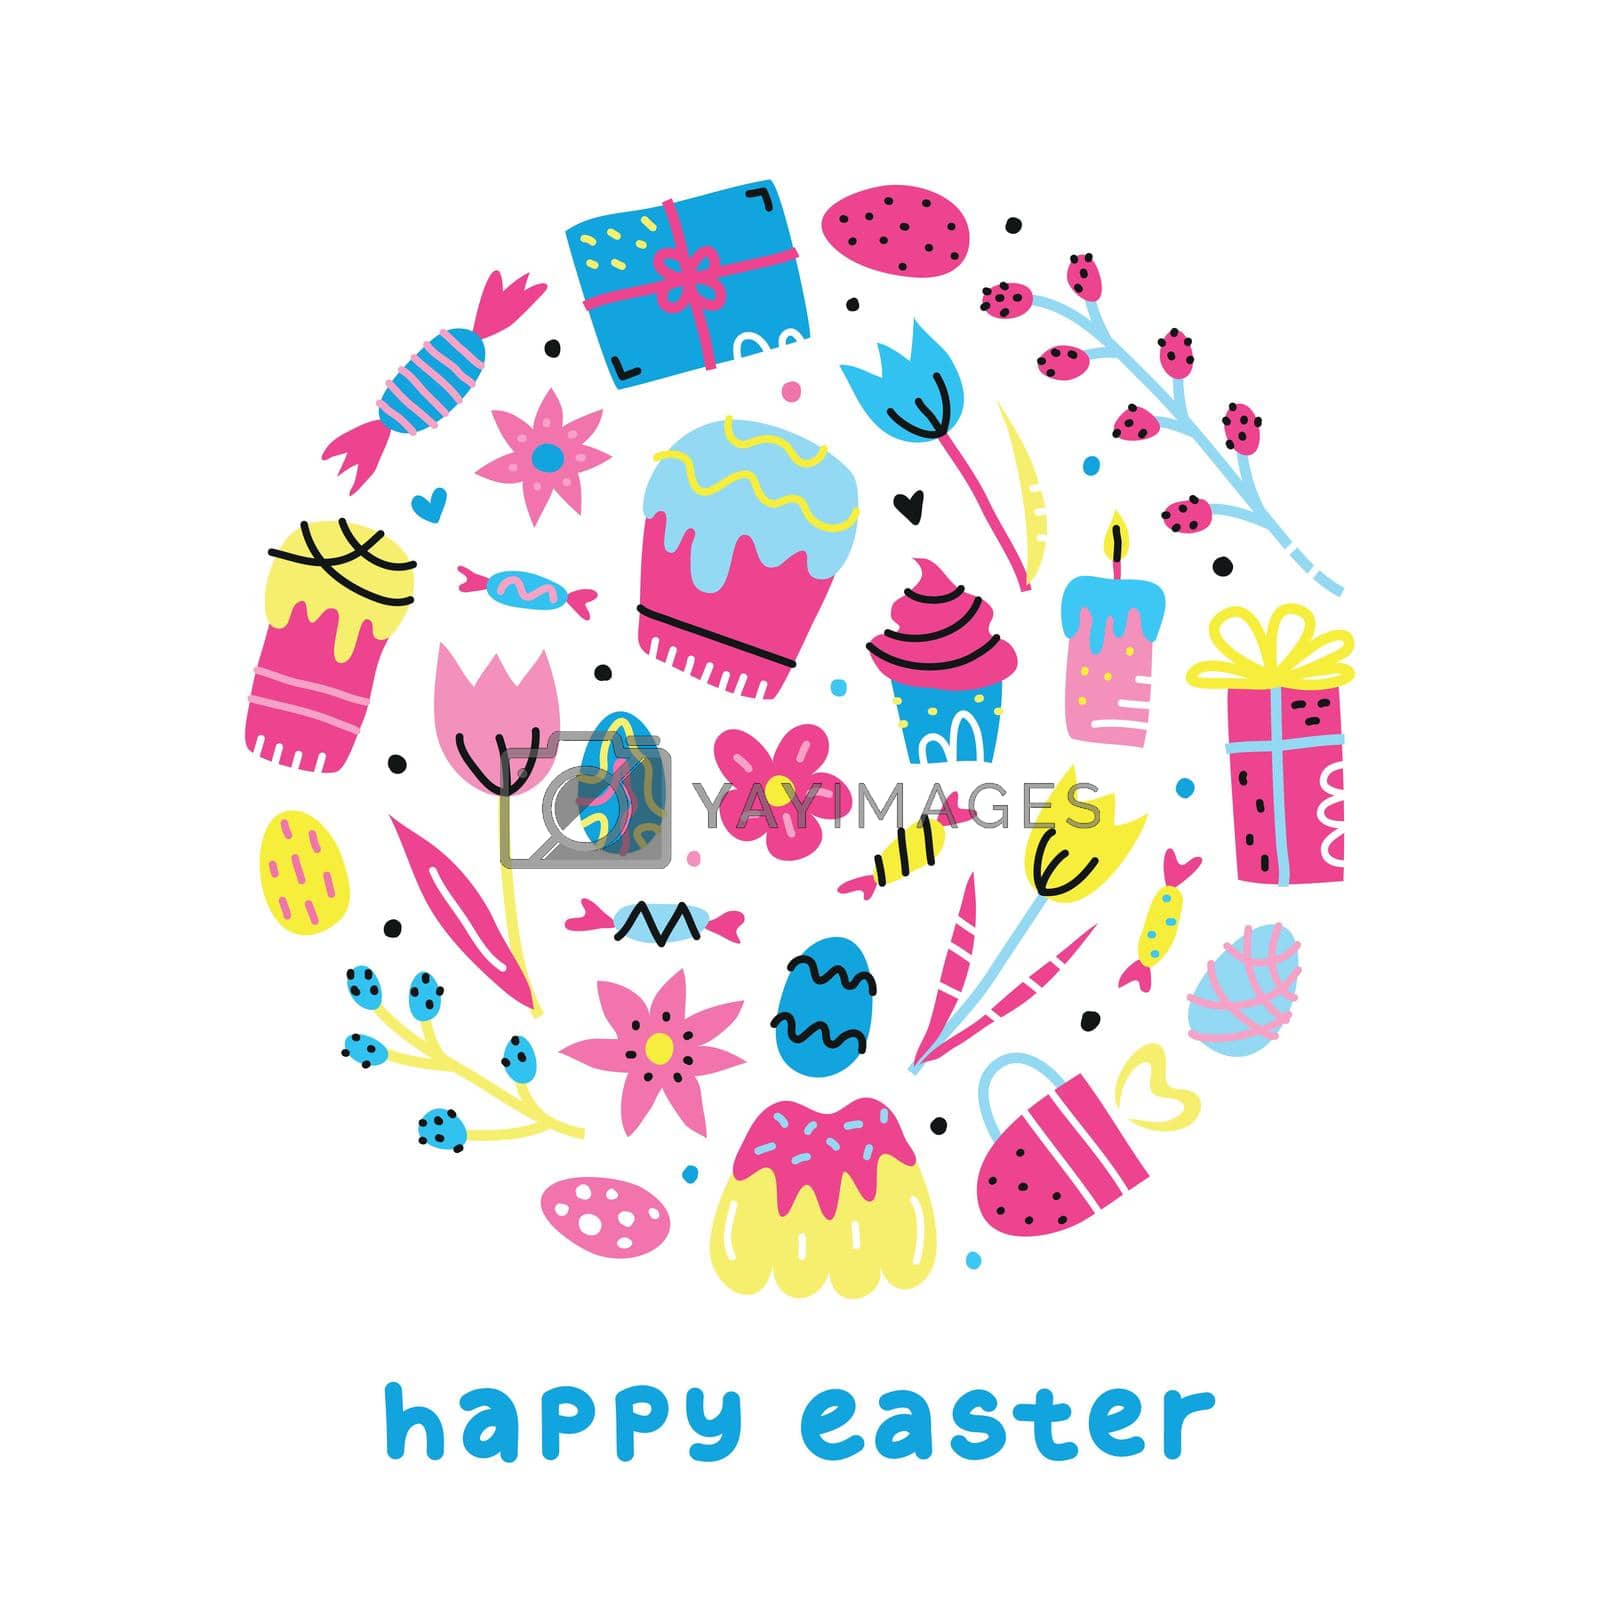 Colorful doodle icons for Easter celebration composed in circle shape.